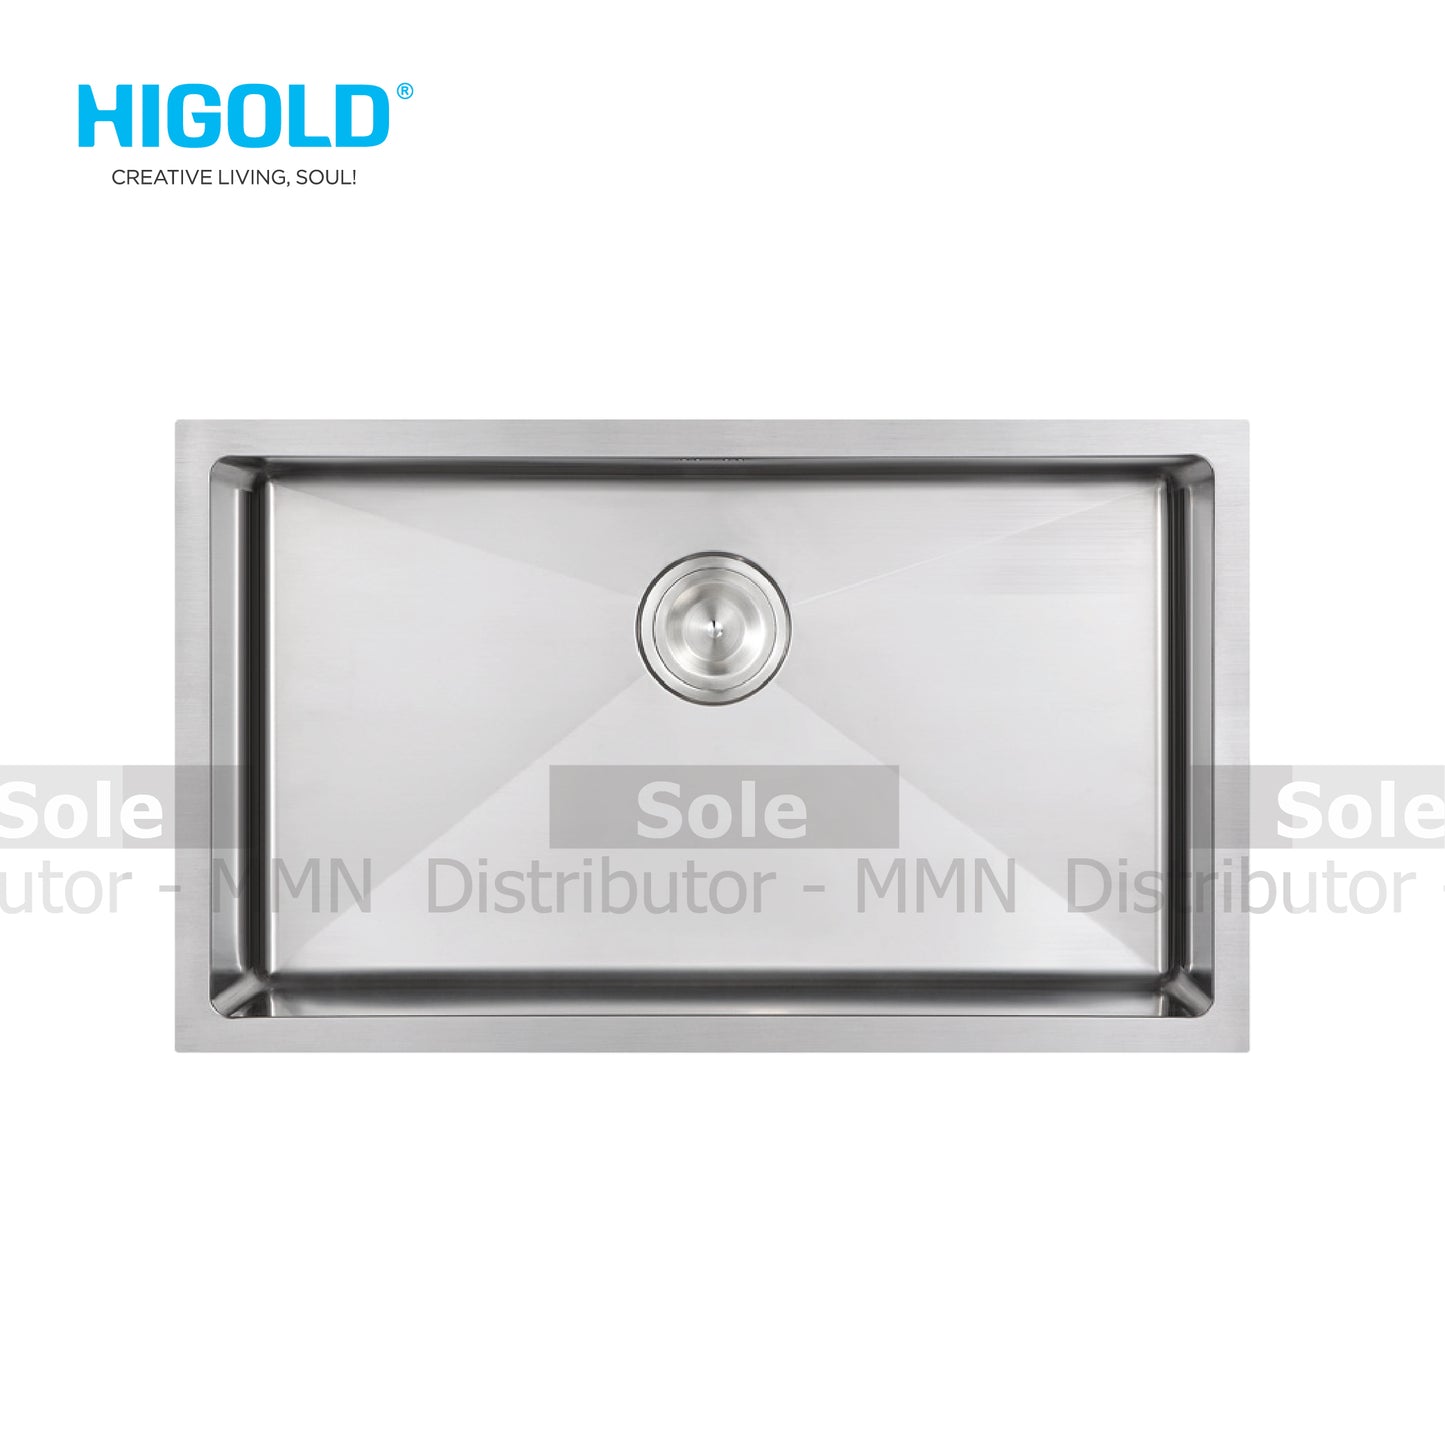 Higold Sink Single Bowl Undermount Dimension 760x450x205mm Stainless Steel Finish  - HG902008